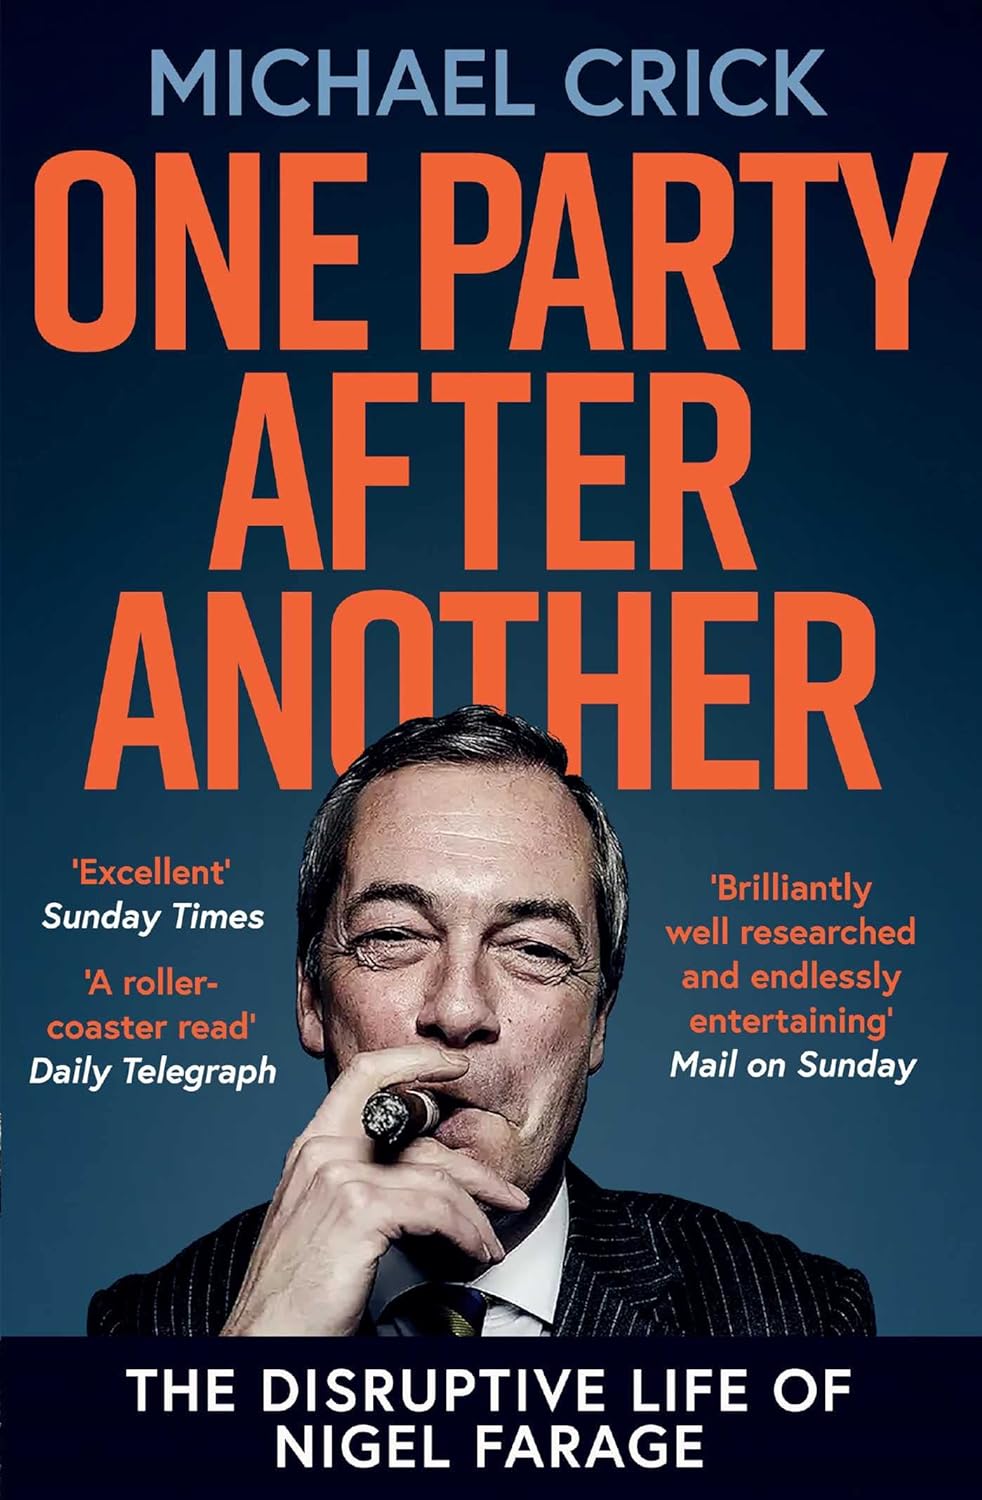 The definitive biography of Farage